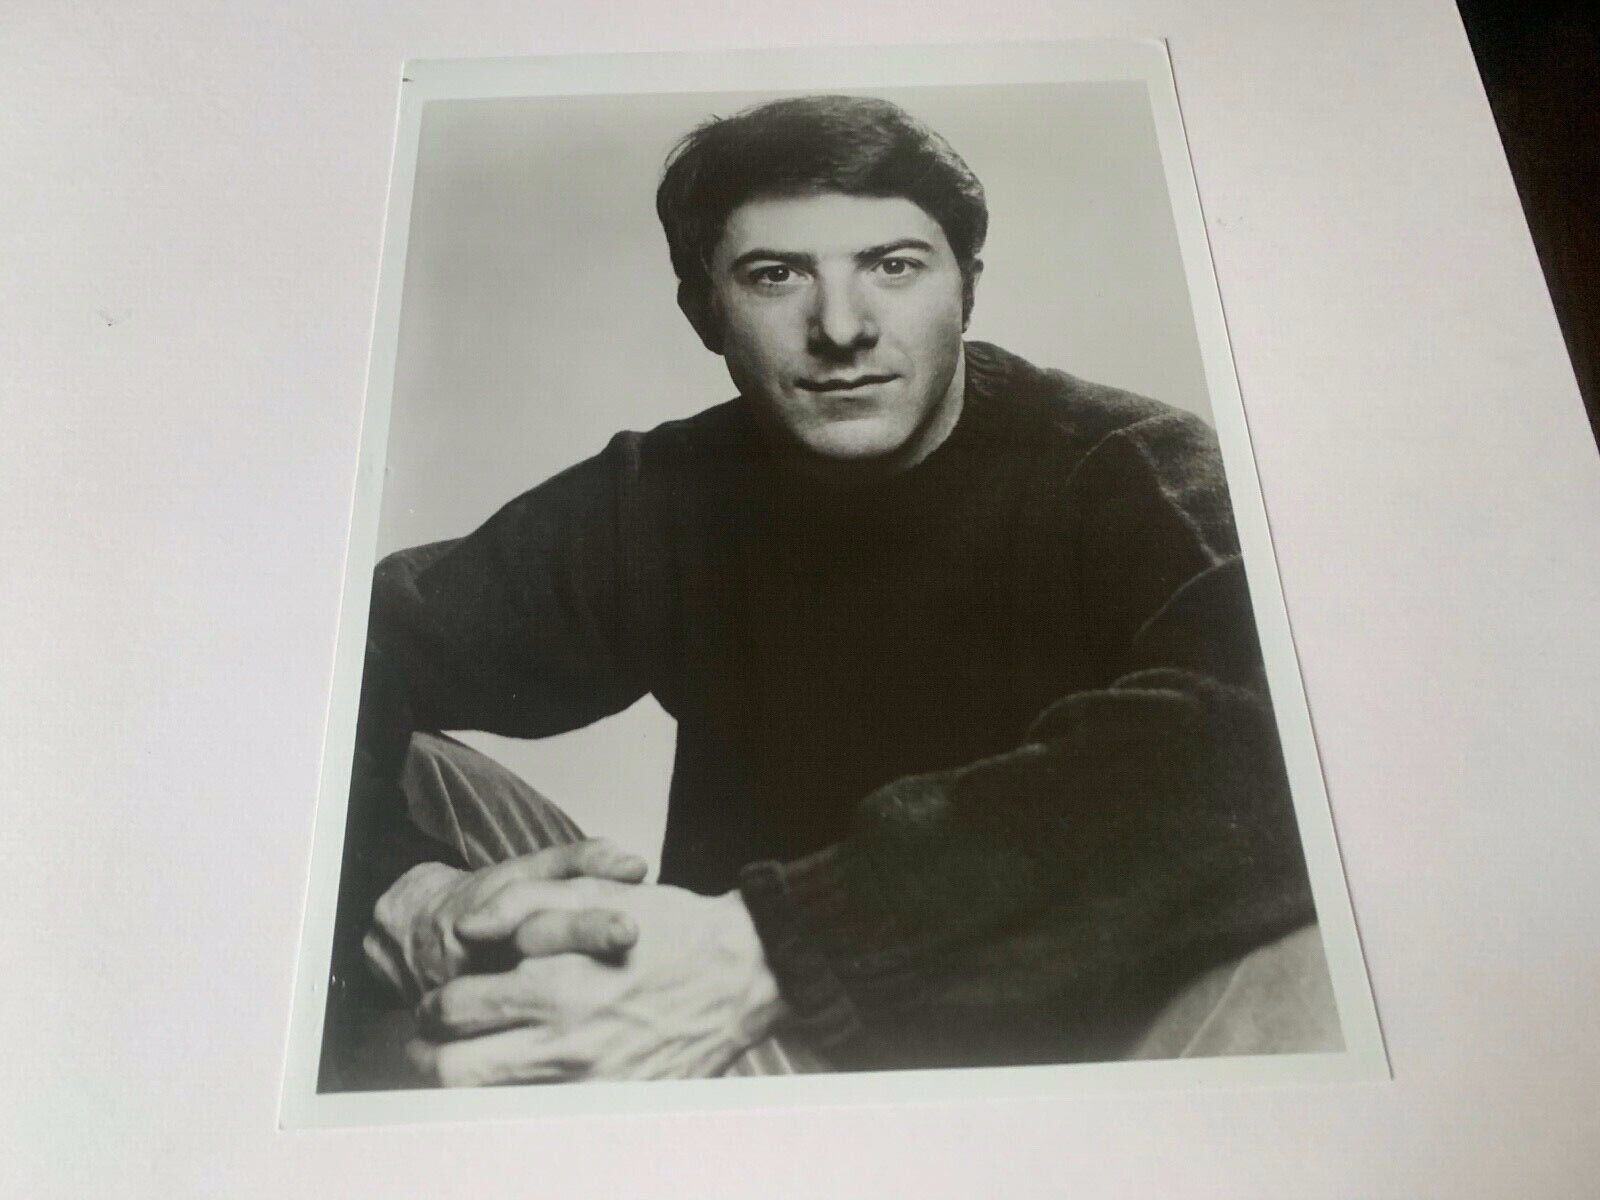 Dustin Hoffman Unsigned Vintage Publicity 8x10 Black and White Celebrity Photo A